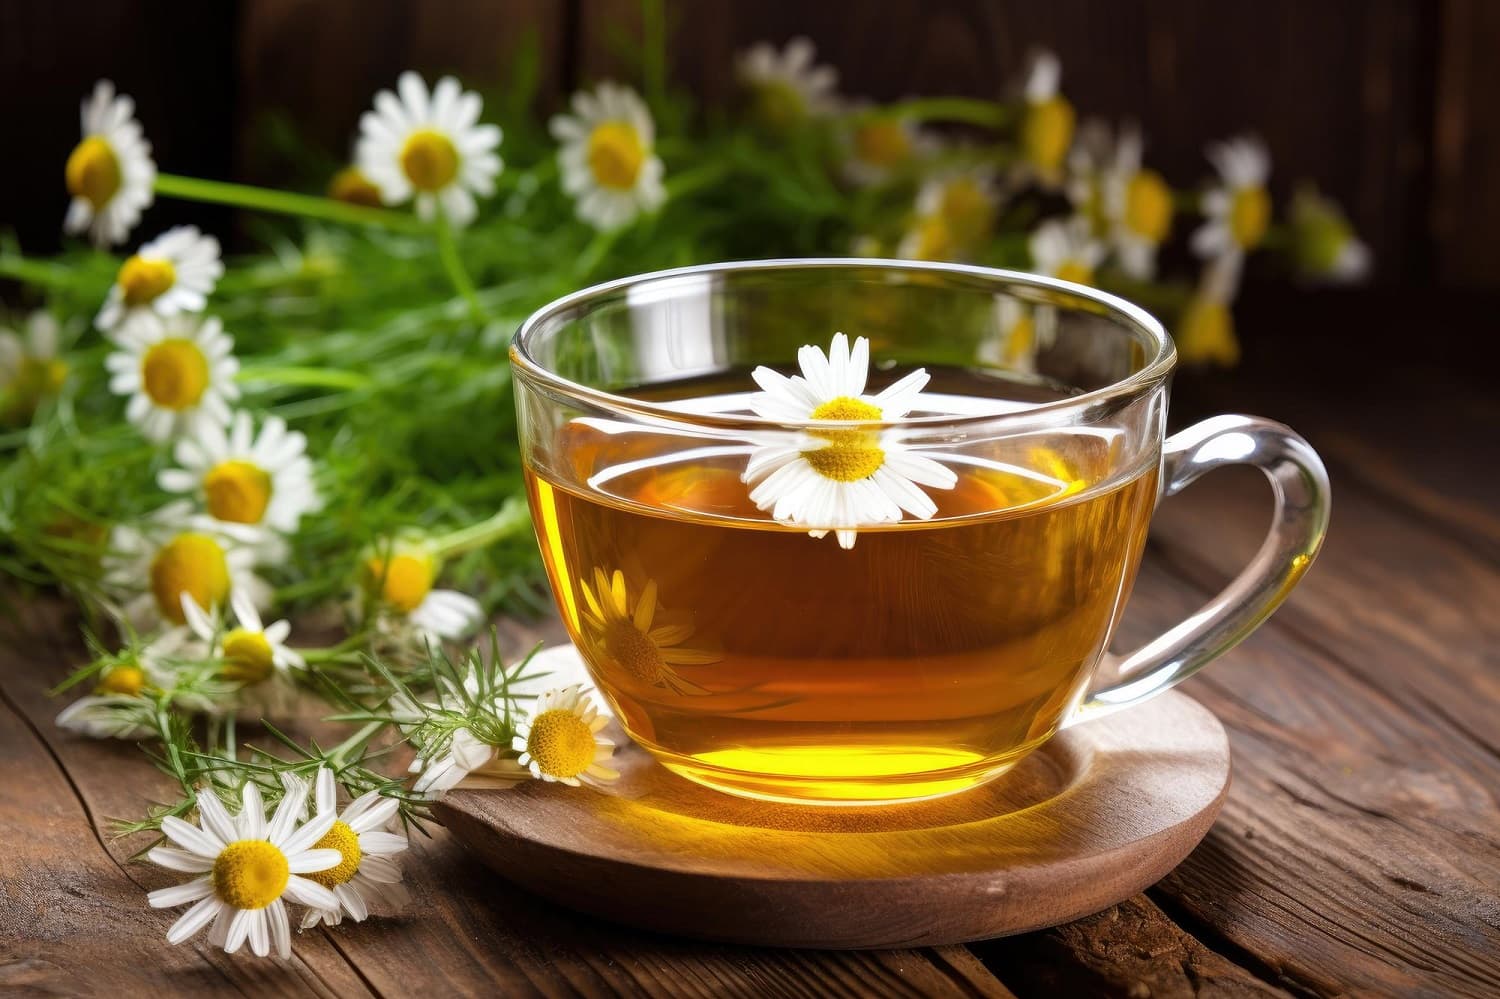 closeup-chamomile-herbal-tea-rustic-glass-cup-wooden-background-with-blossoms-promotin_908985-110673 (1)